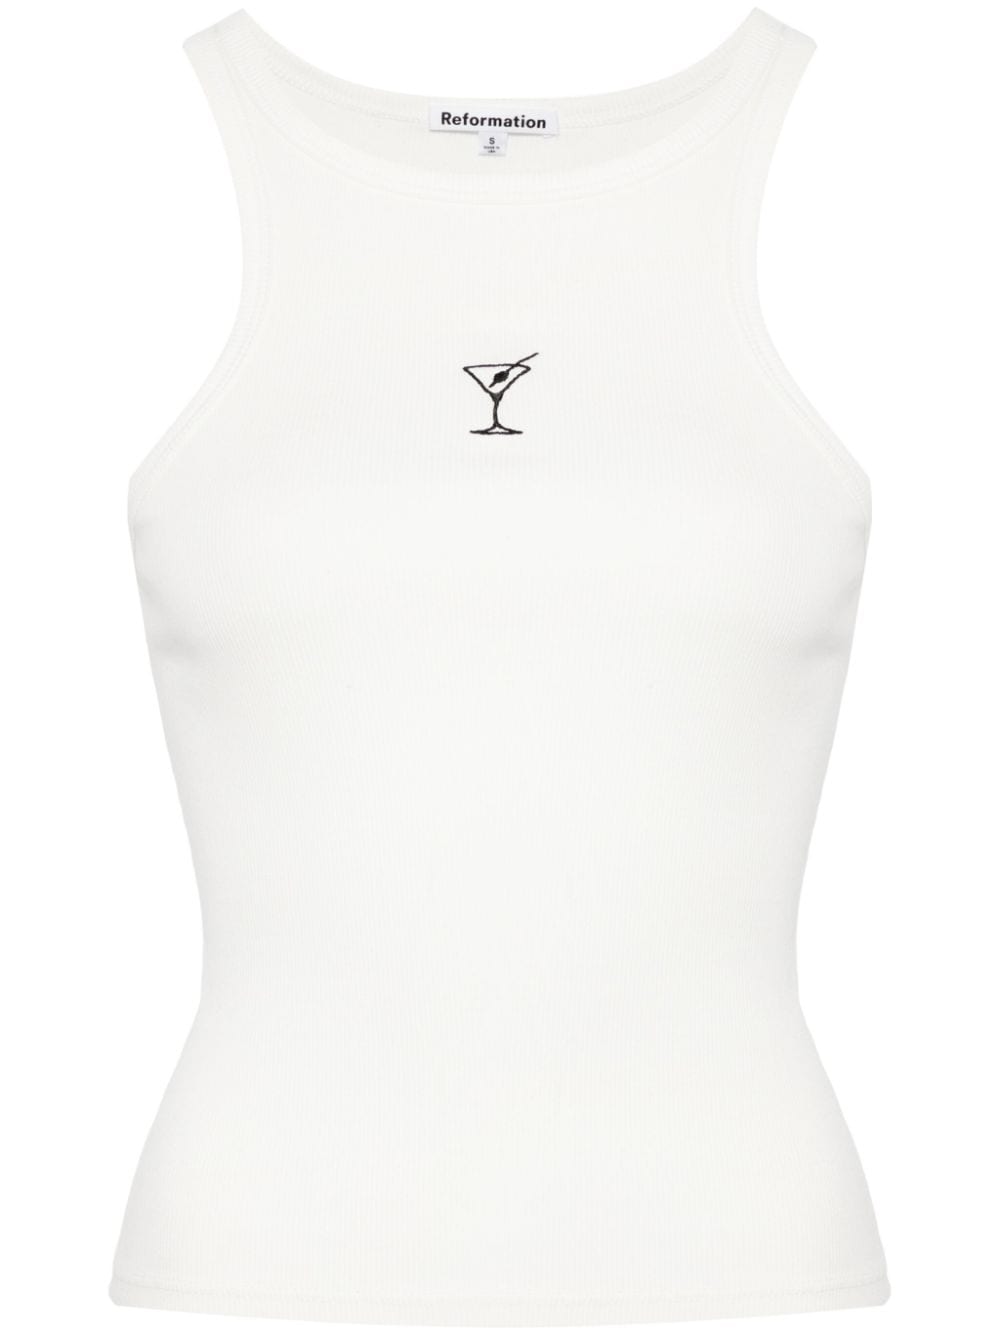 Reformation Nova Embroidered Tank Top In White